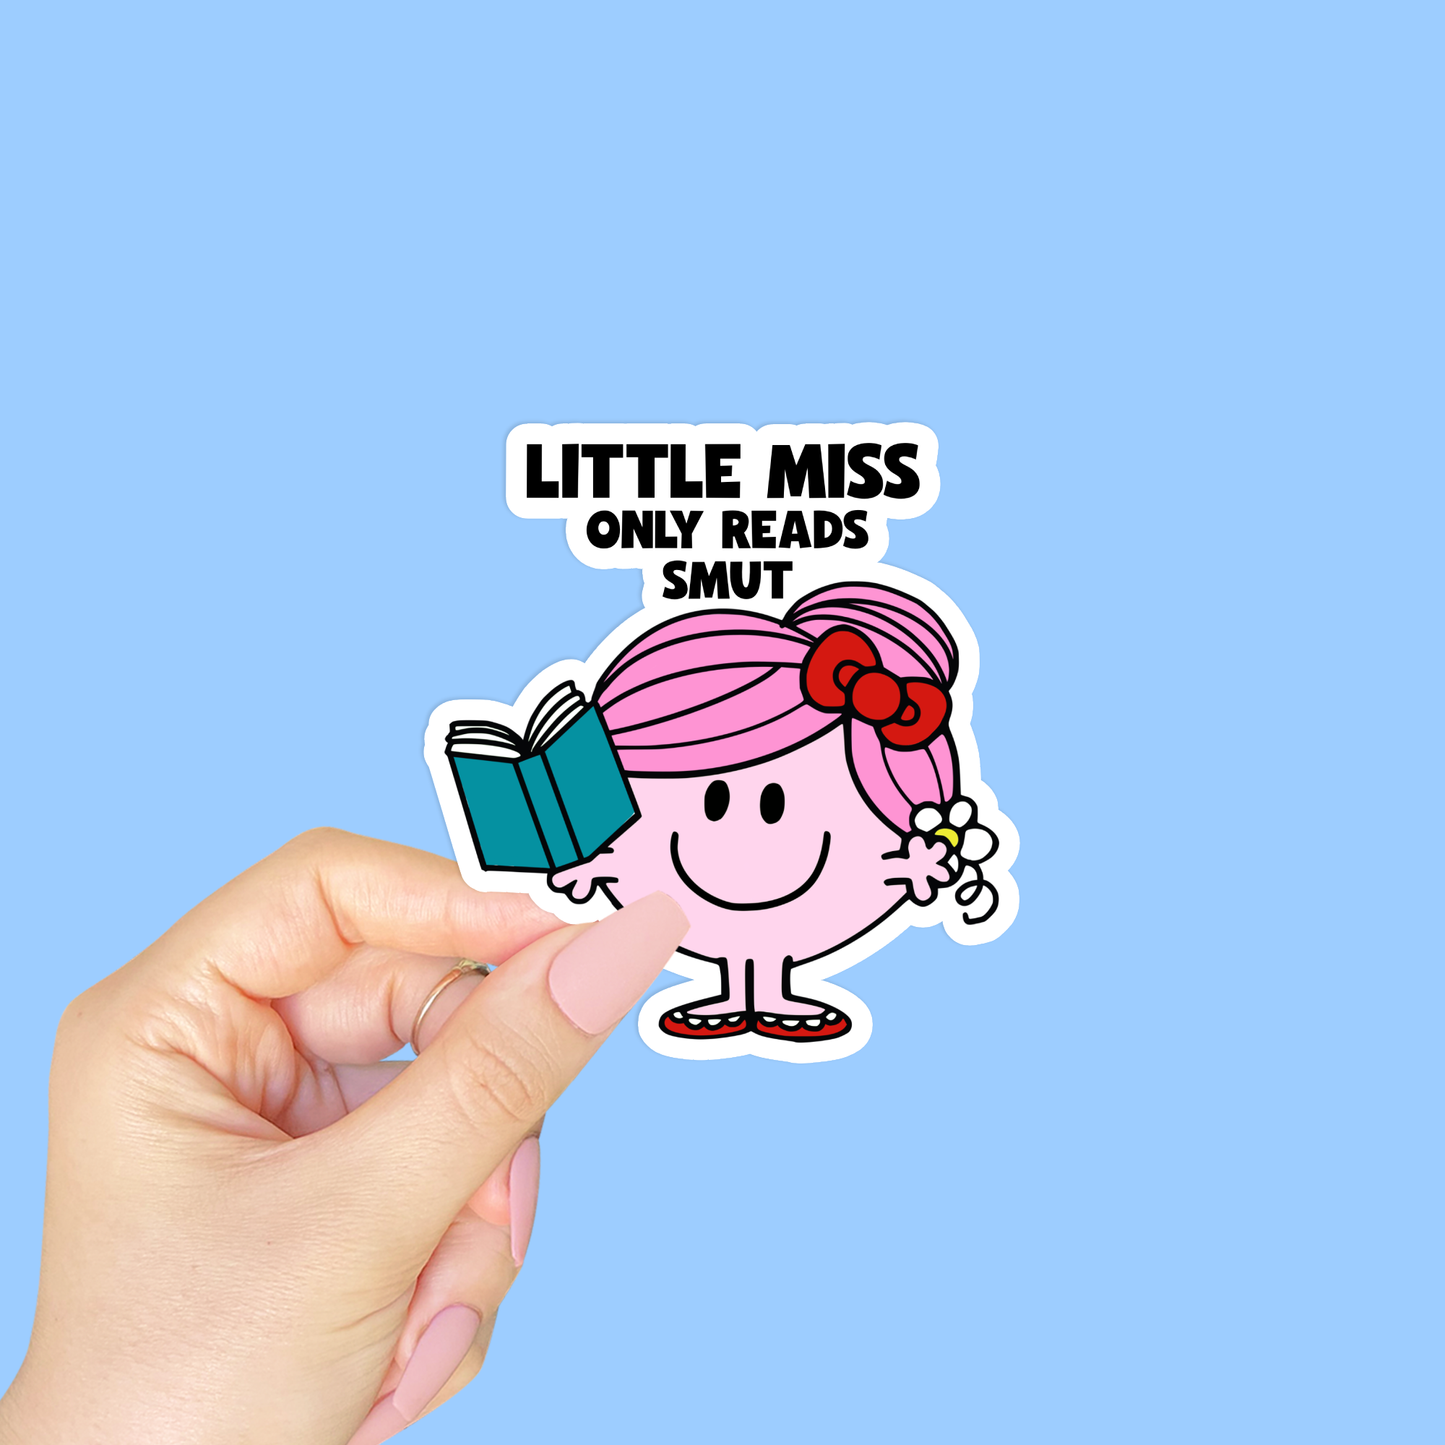 Lil miss only reads smut